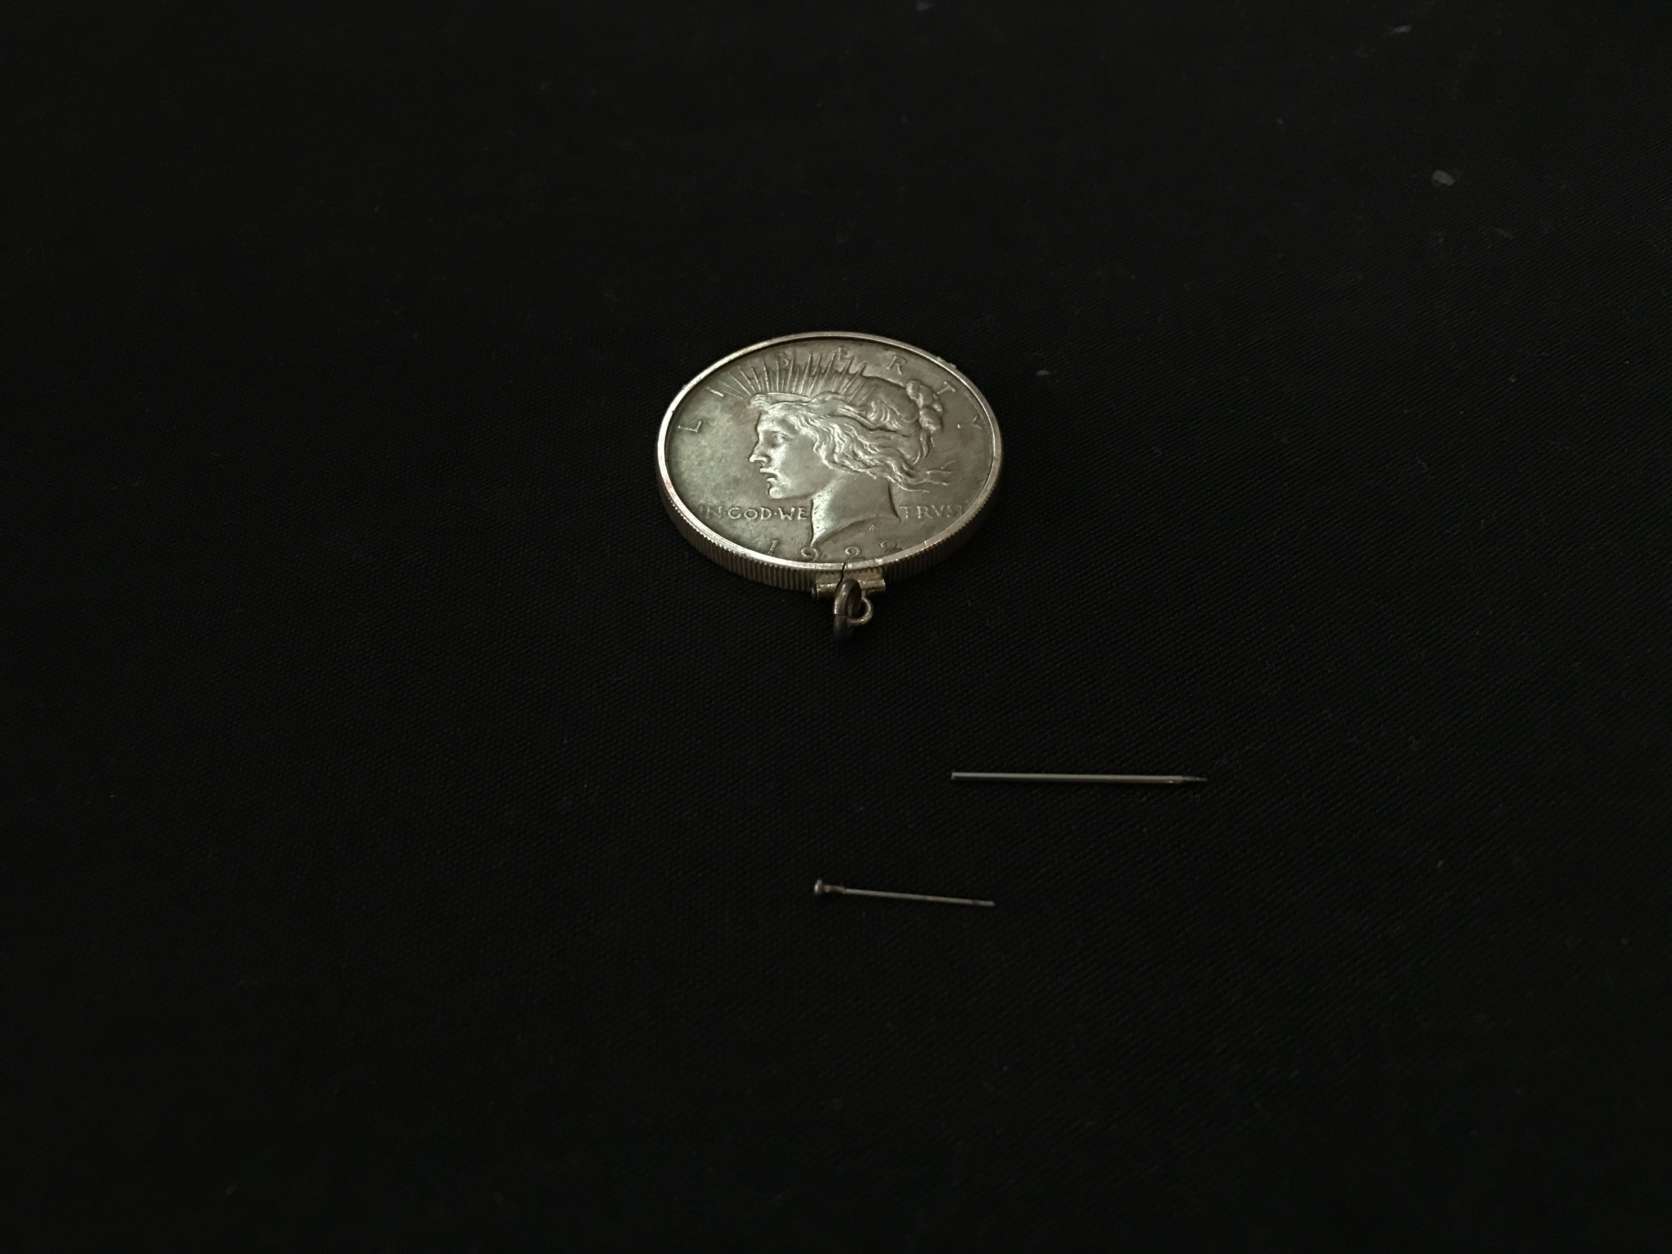 A "concealment coin," made for U2 spy plane missions, contained a spring-loaded pin (also pictured) that was loaded with a lethal toxin. (WTOP/Ginger Whitaker)